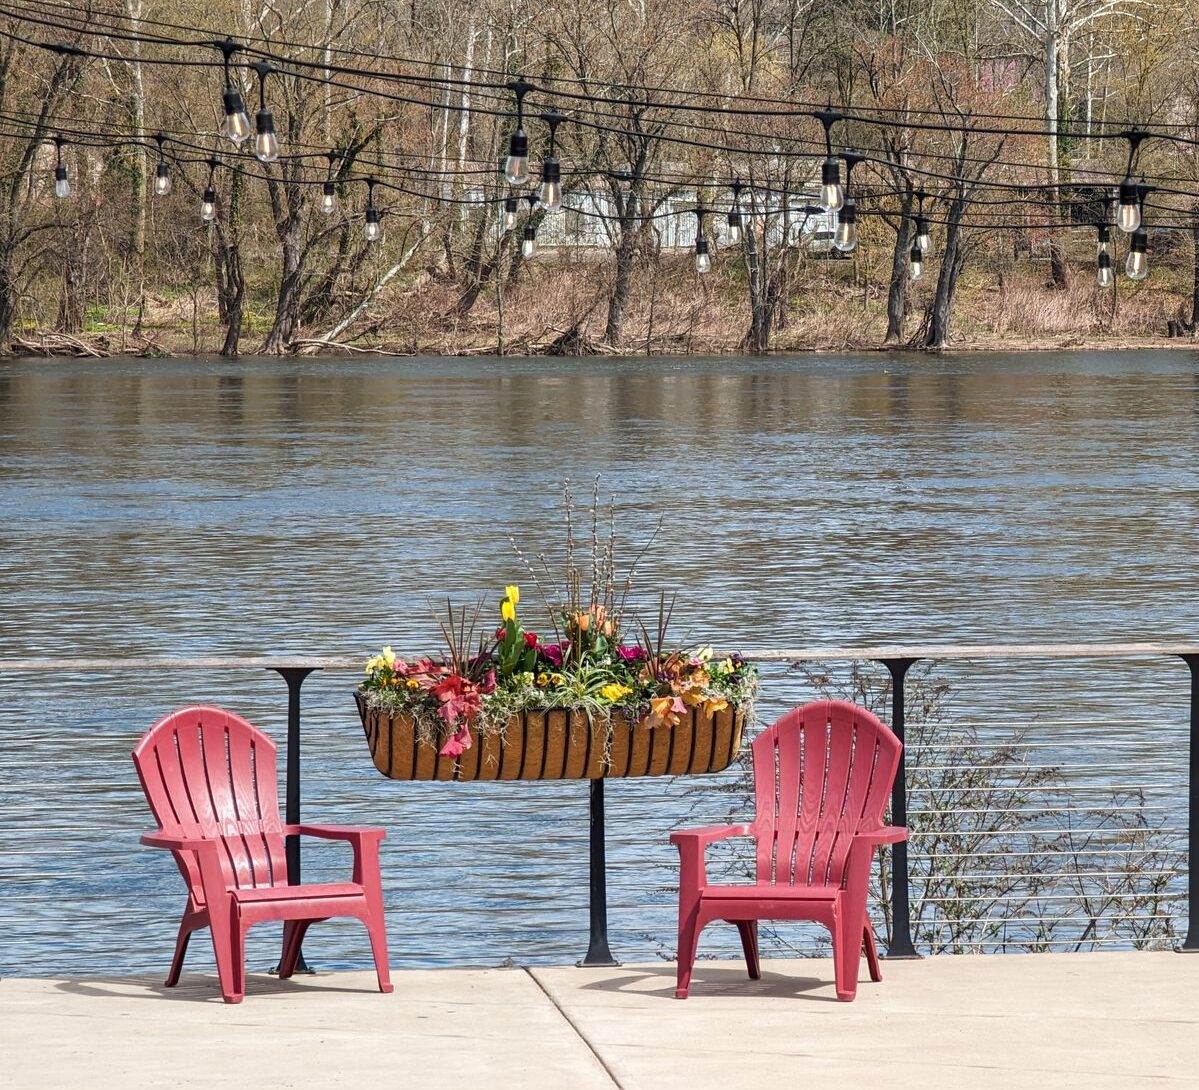 Two chairs and flowers along the delaware river